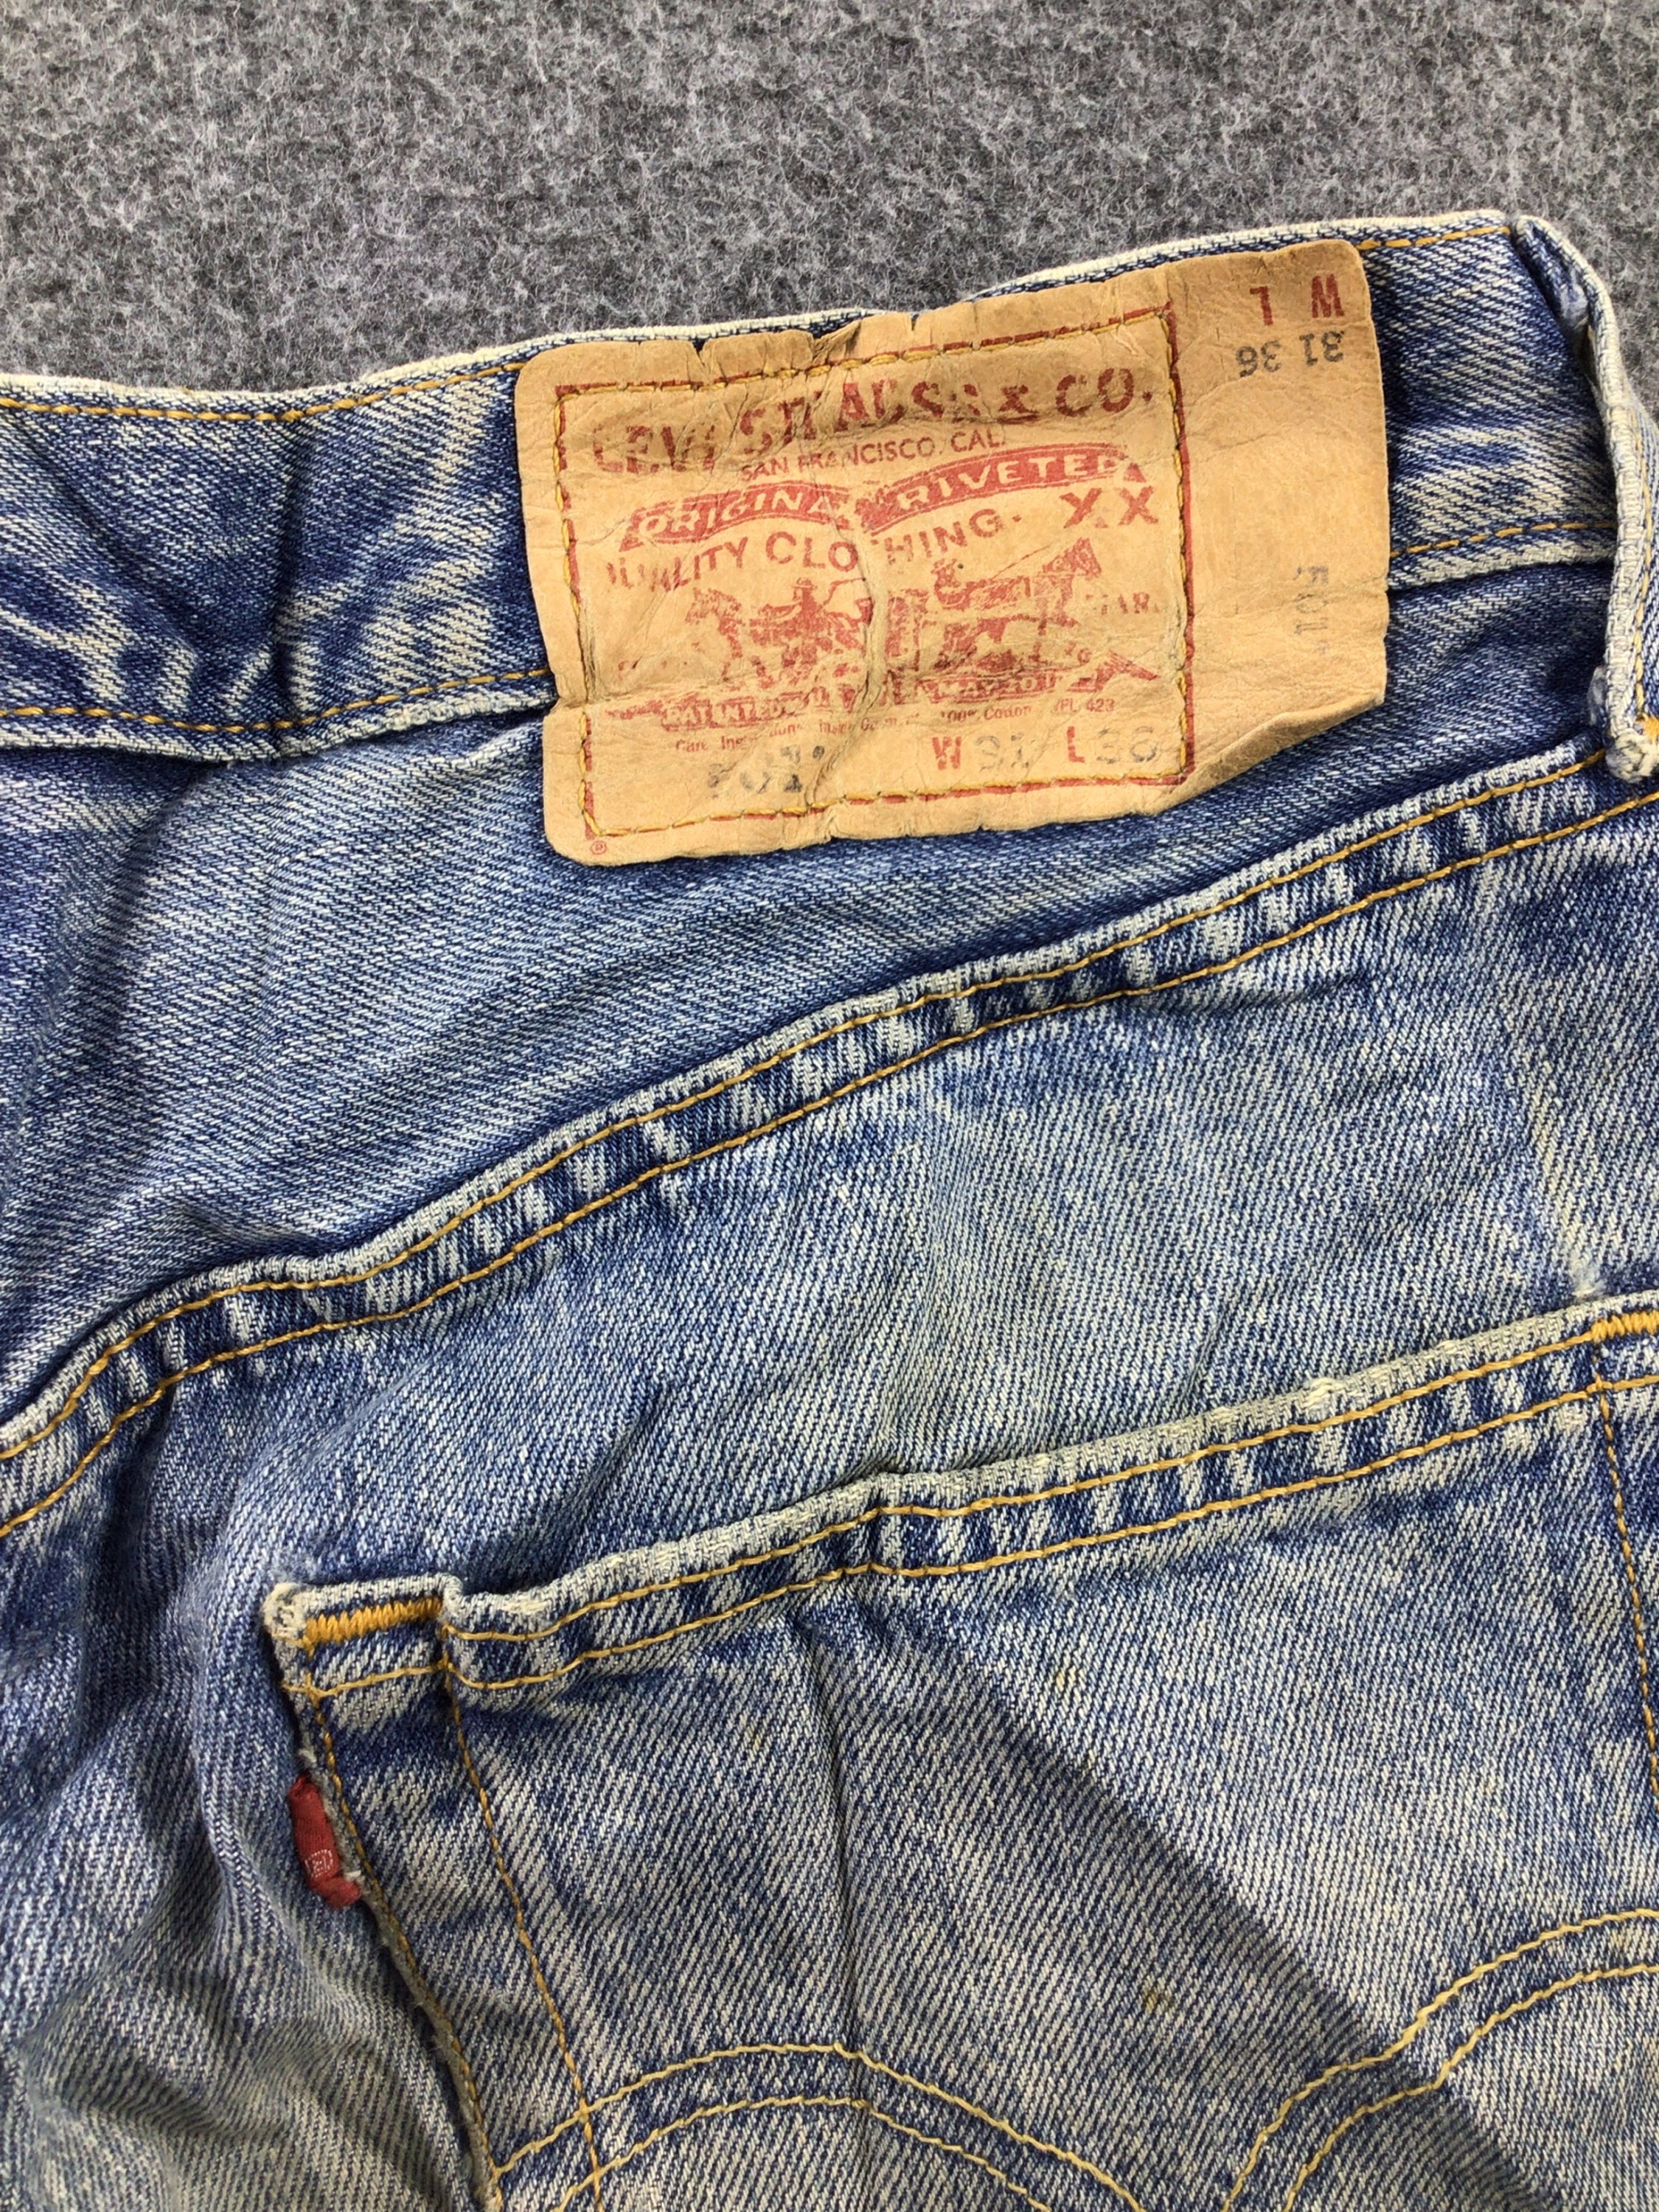 Vintage Levis 501 Jeans Rusty Faded Blue Distressed Denim Size - Etsy